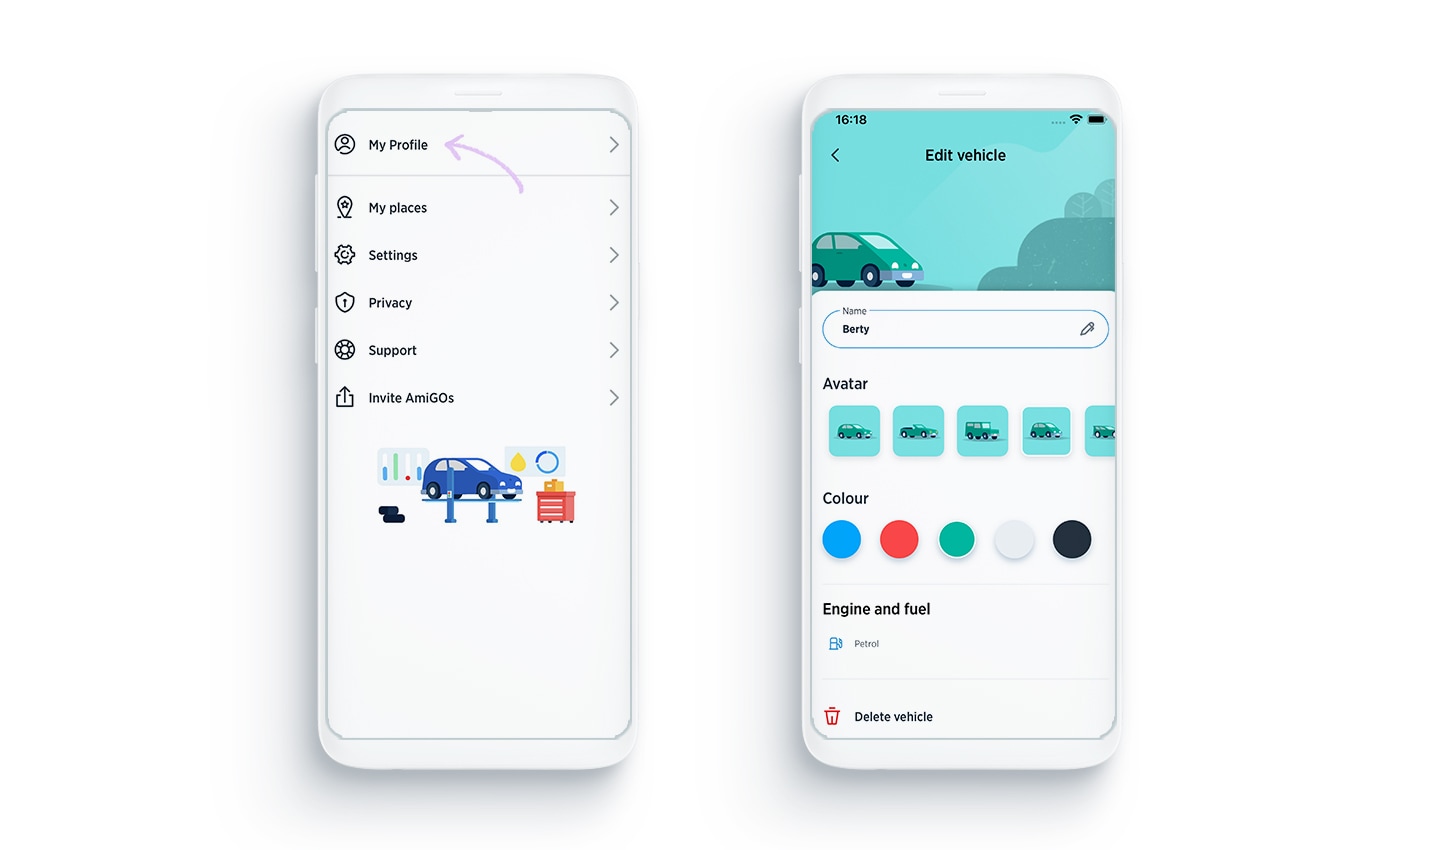 Before setting up personalization, you need to go to ‘My Profile’ in the AmiGO app. Once you've done that, you can now customize your vehicle, giving it a name, a body type, color and fuel type.